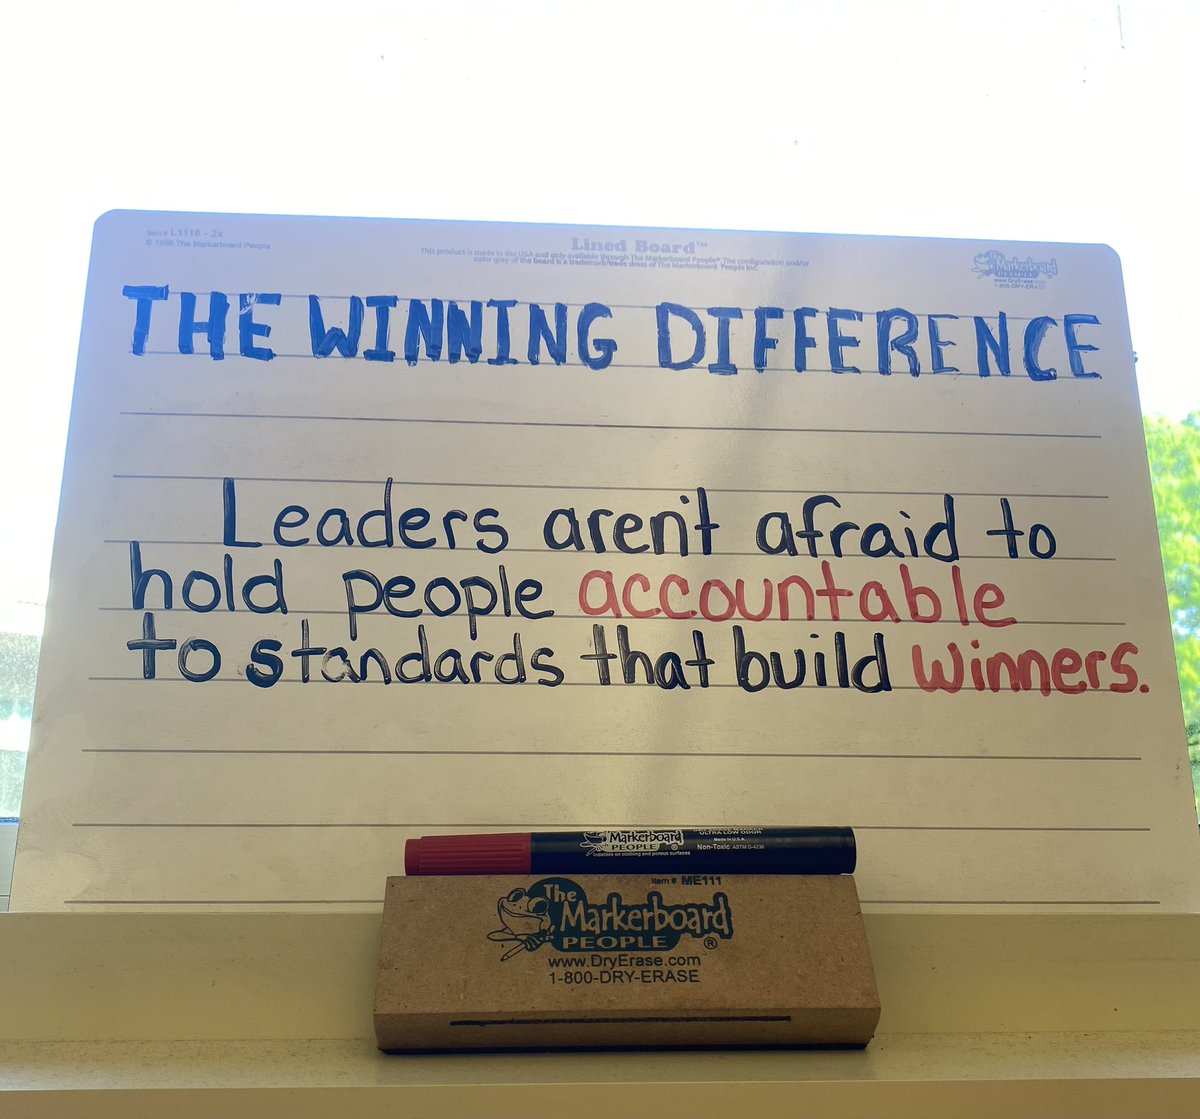 Leaders aren’t afraid to hold people accountable to standards that build winners.